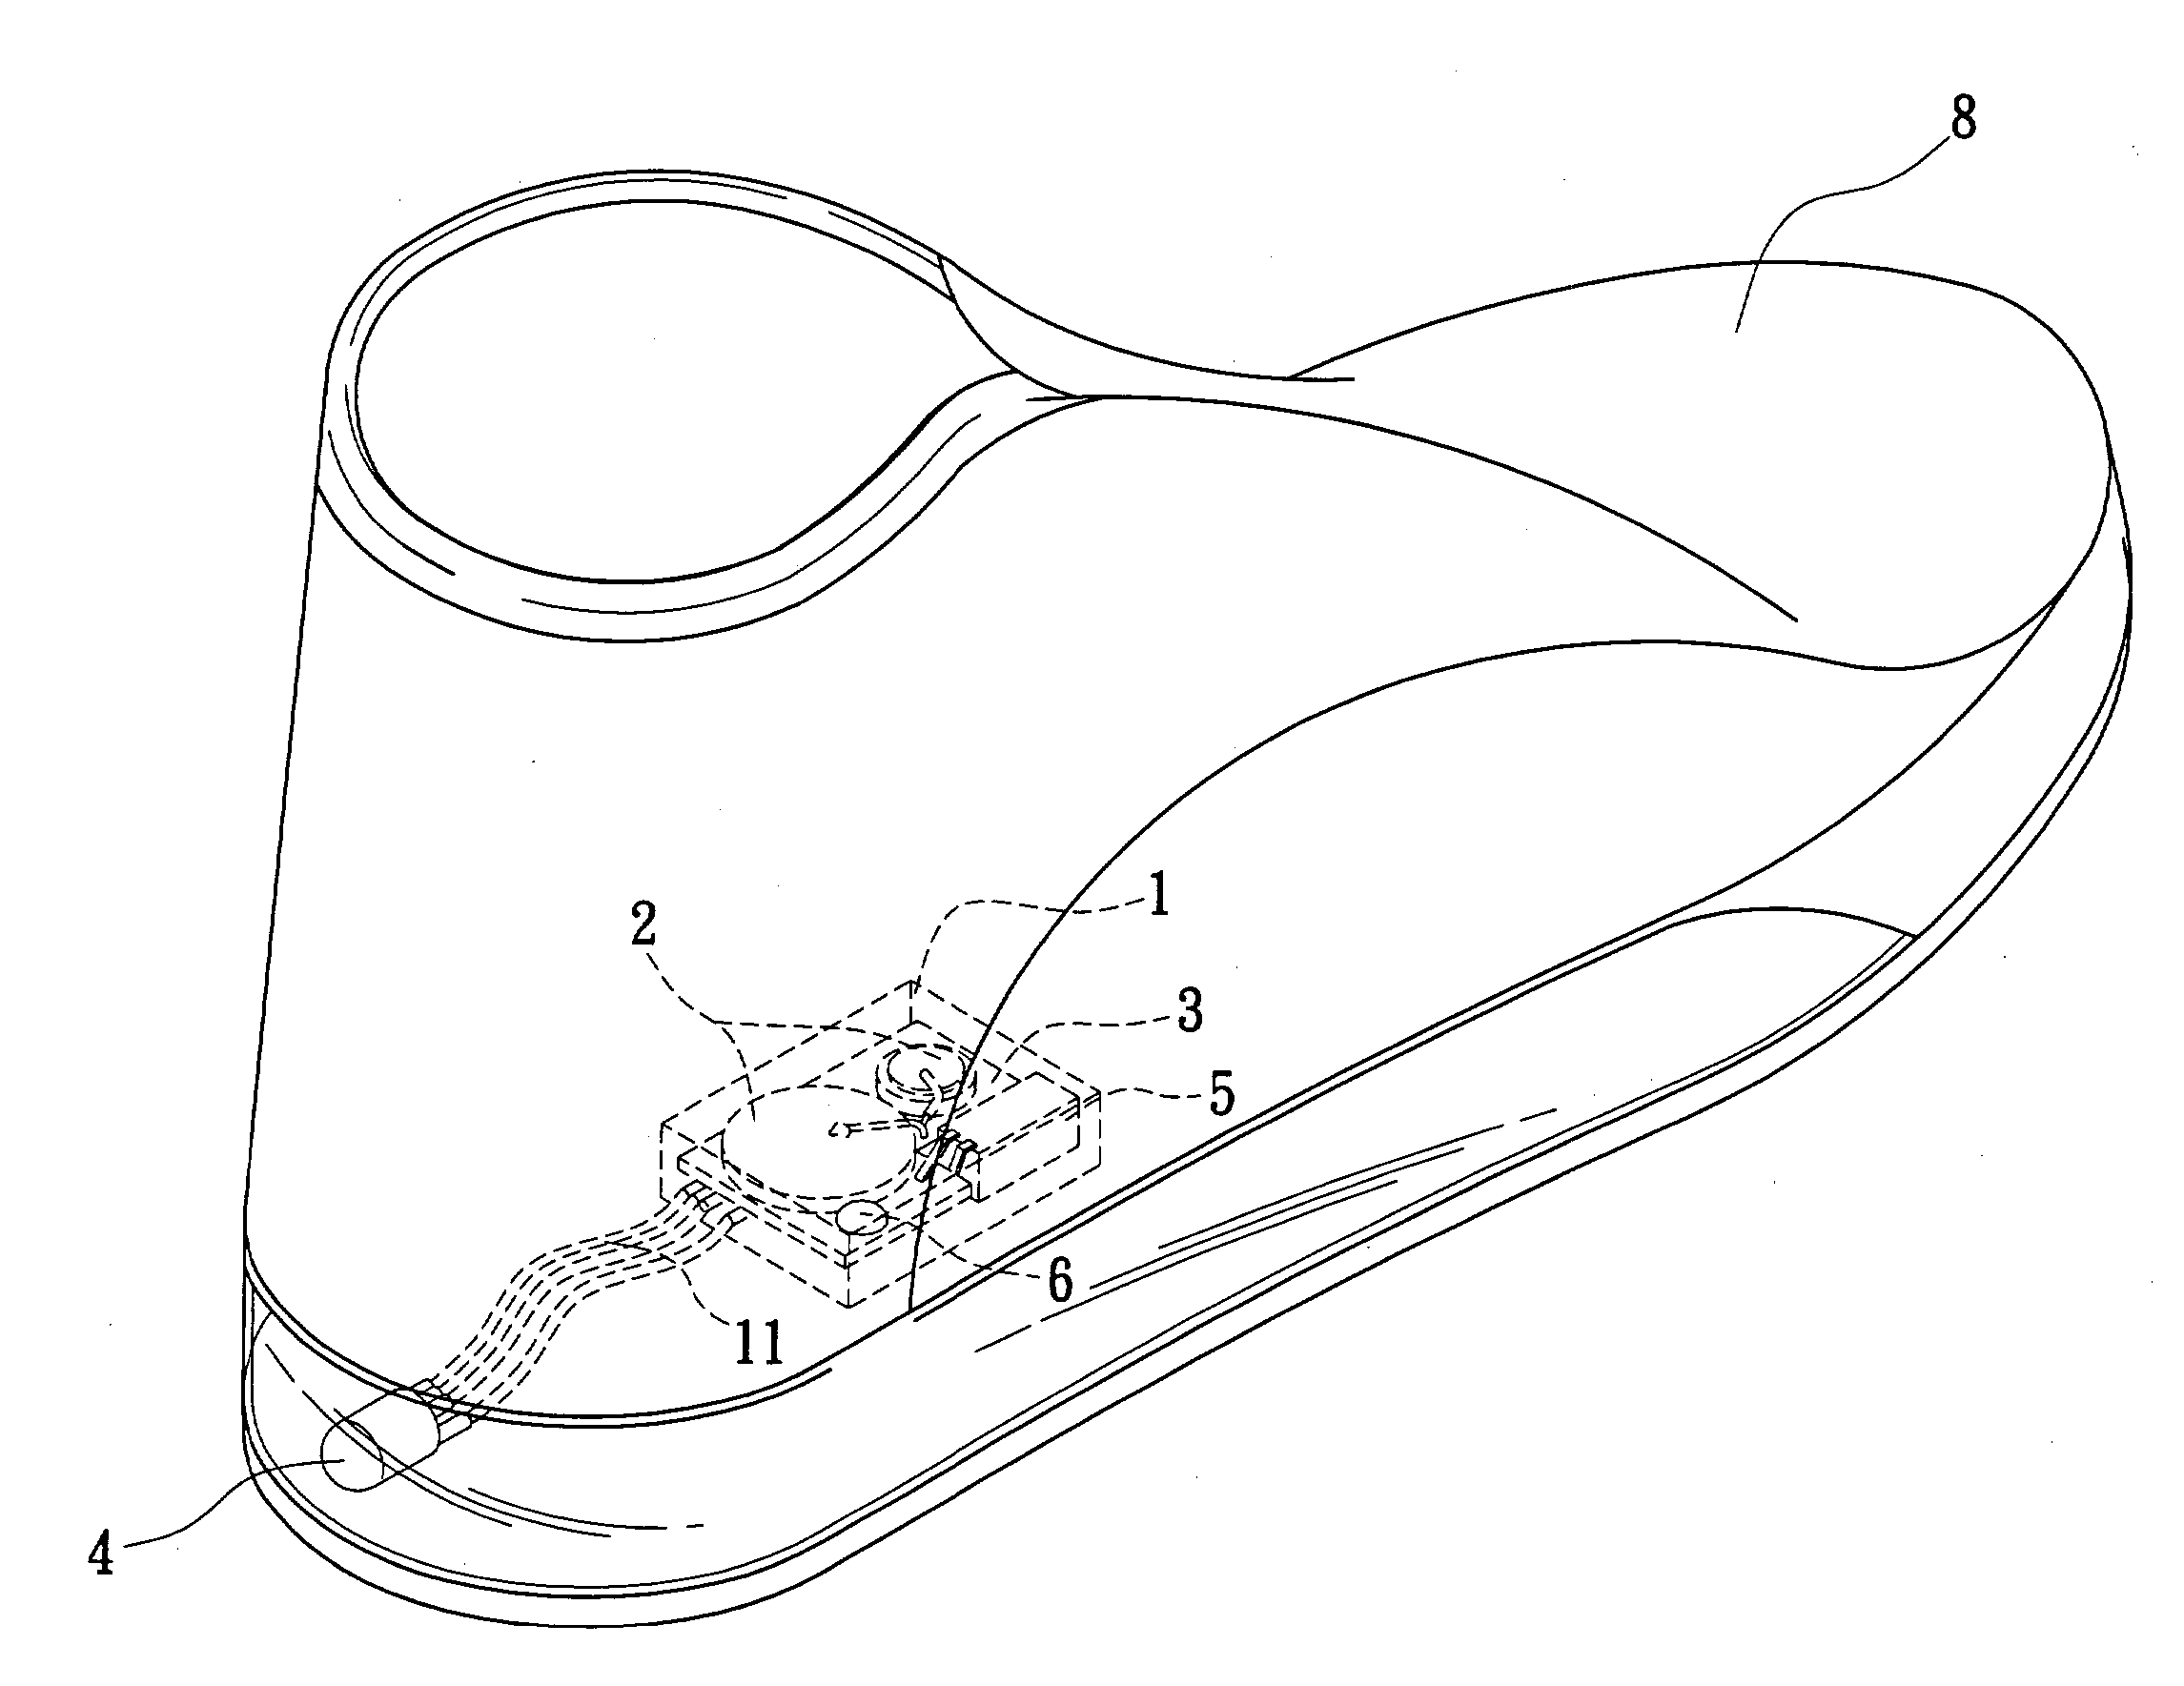 Shoe light device with multiple color variations